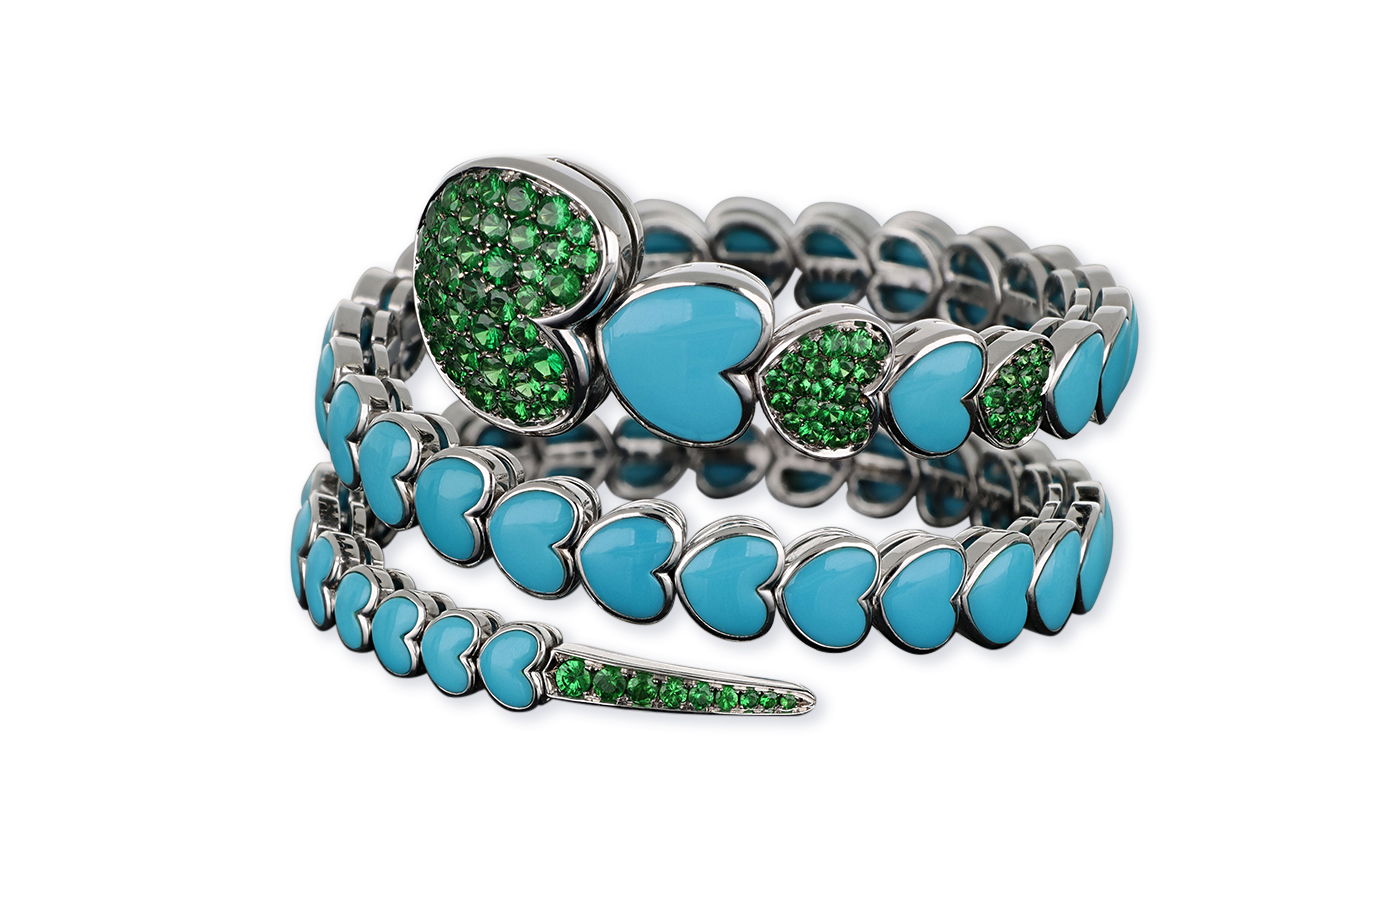 J’OR Jewels Nuance bracelet with tsavorite garnets and heart-shaped turquoise in 18k white gold 